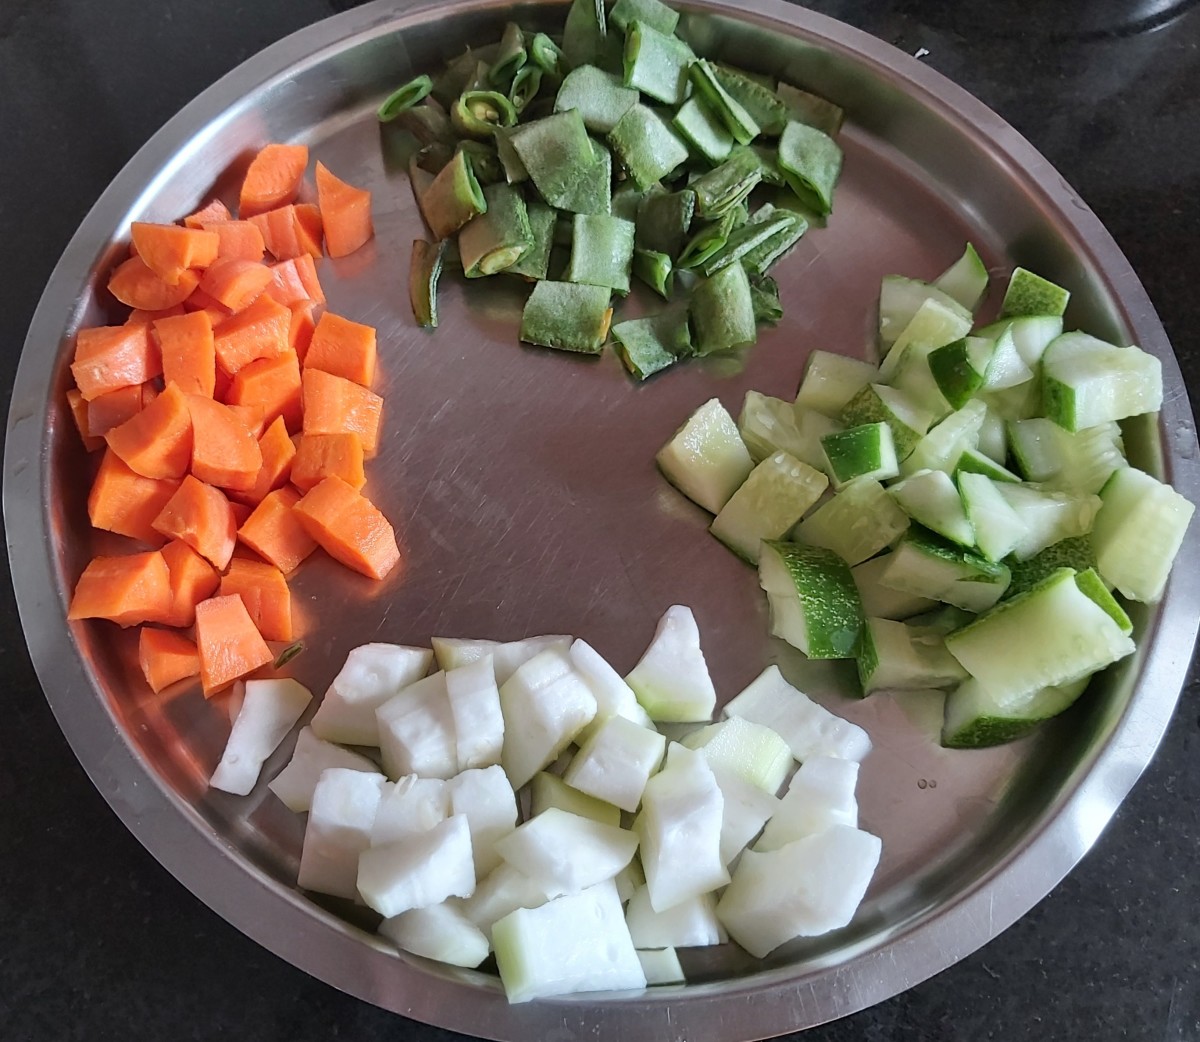 Wash and chop all vegetables you are using. (I used broad beans, bottle gourd, carrots, and cucumber. You can use any vegetables of your choice.)